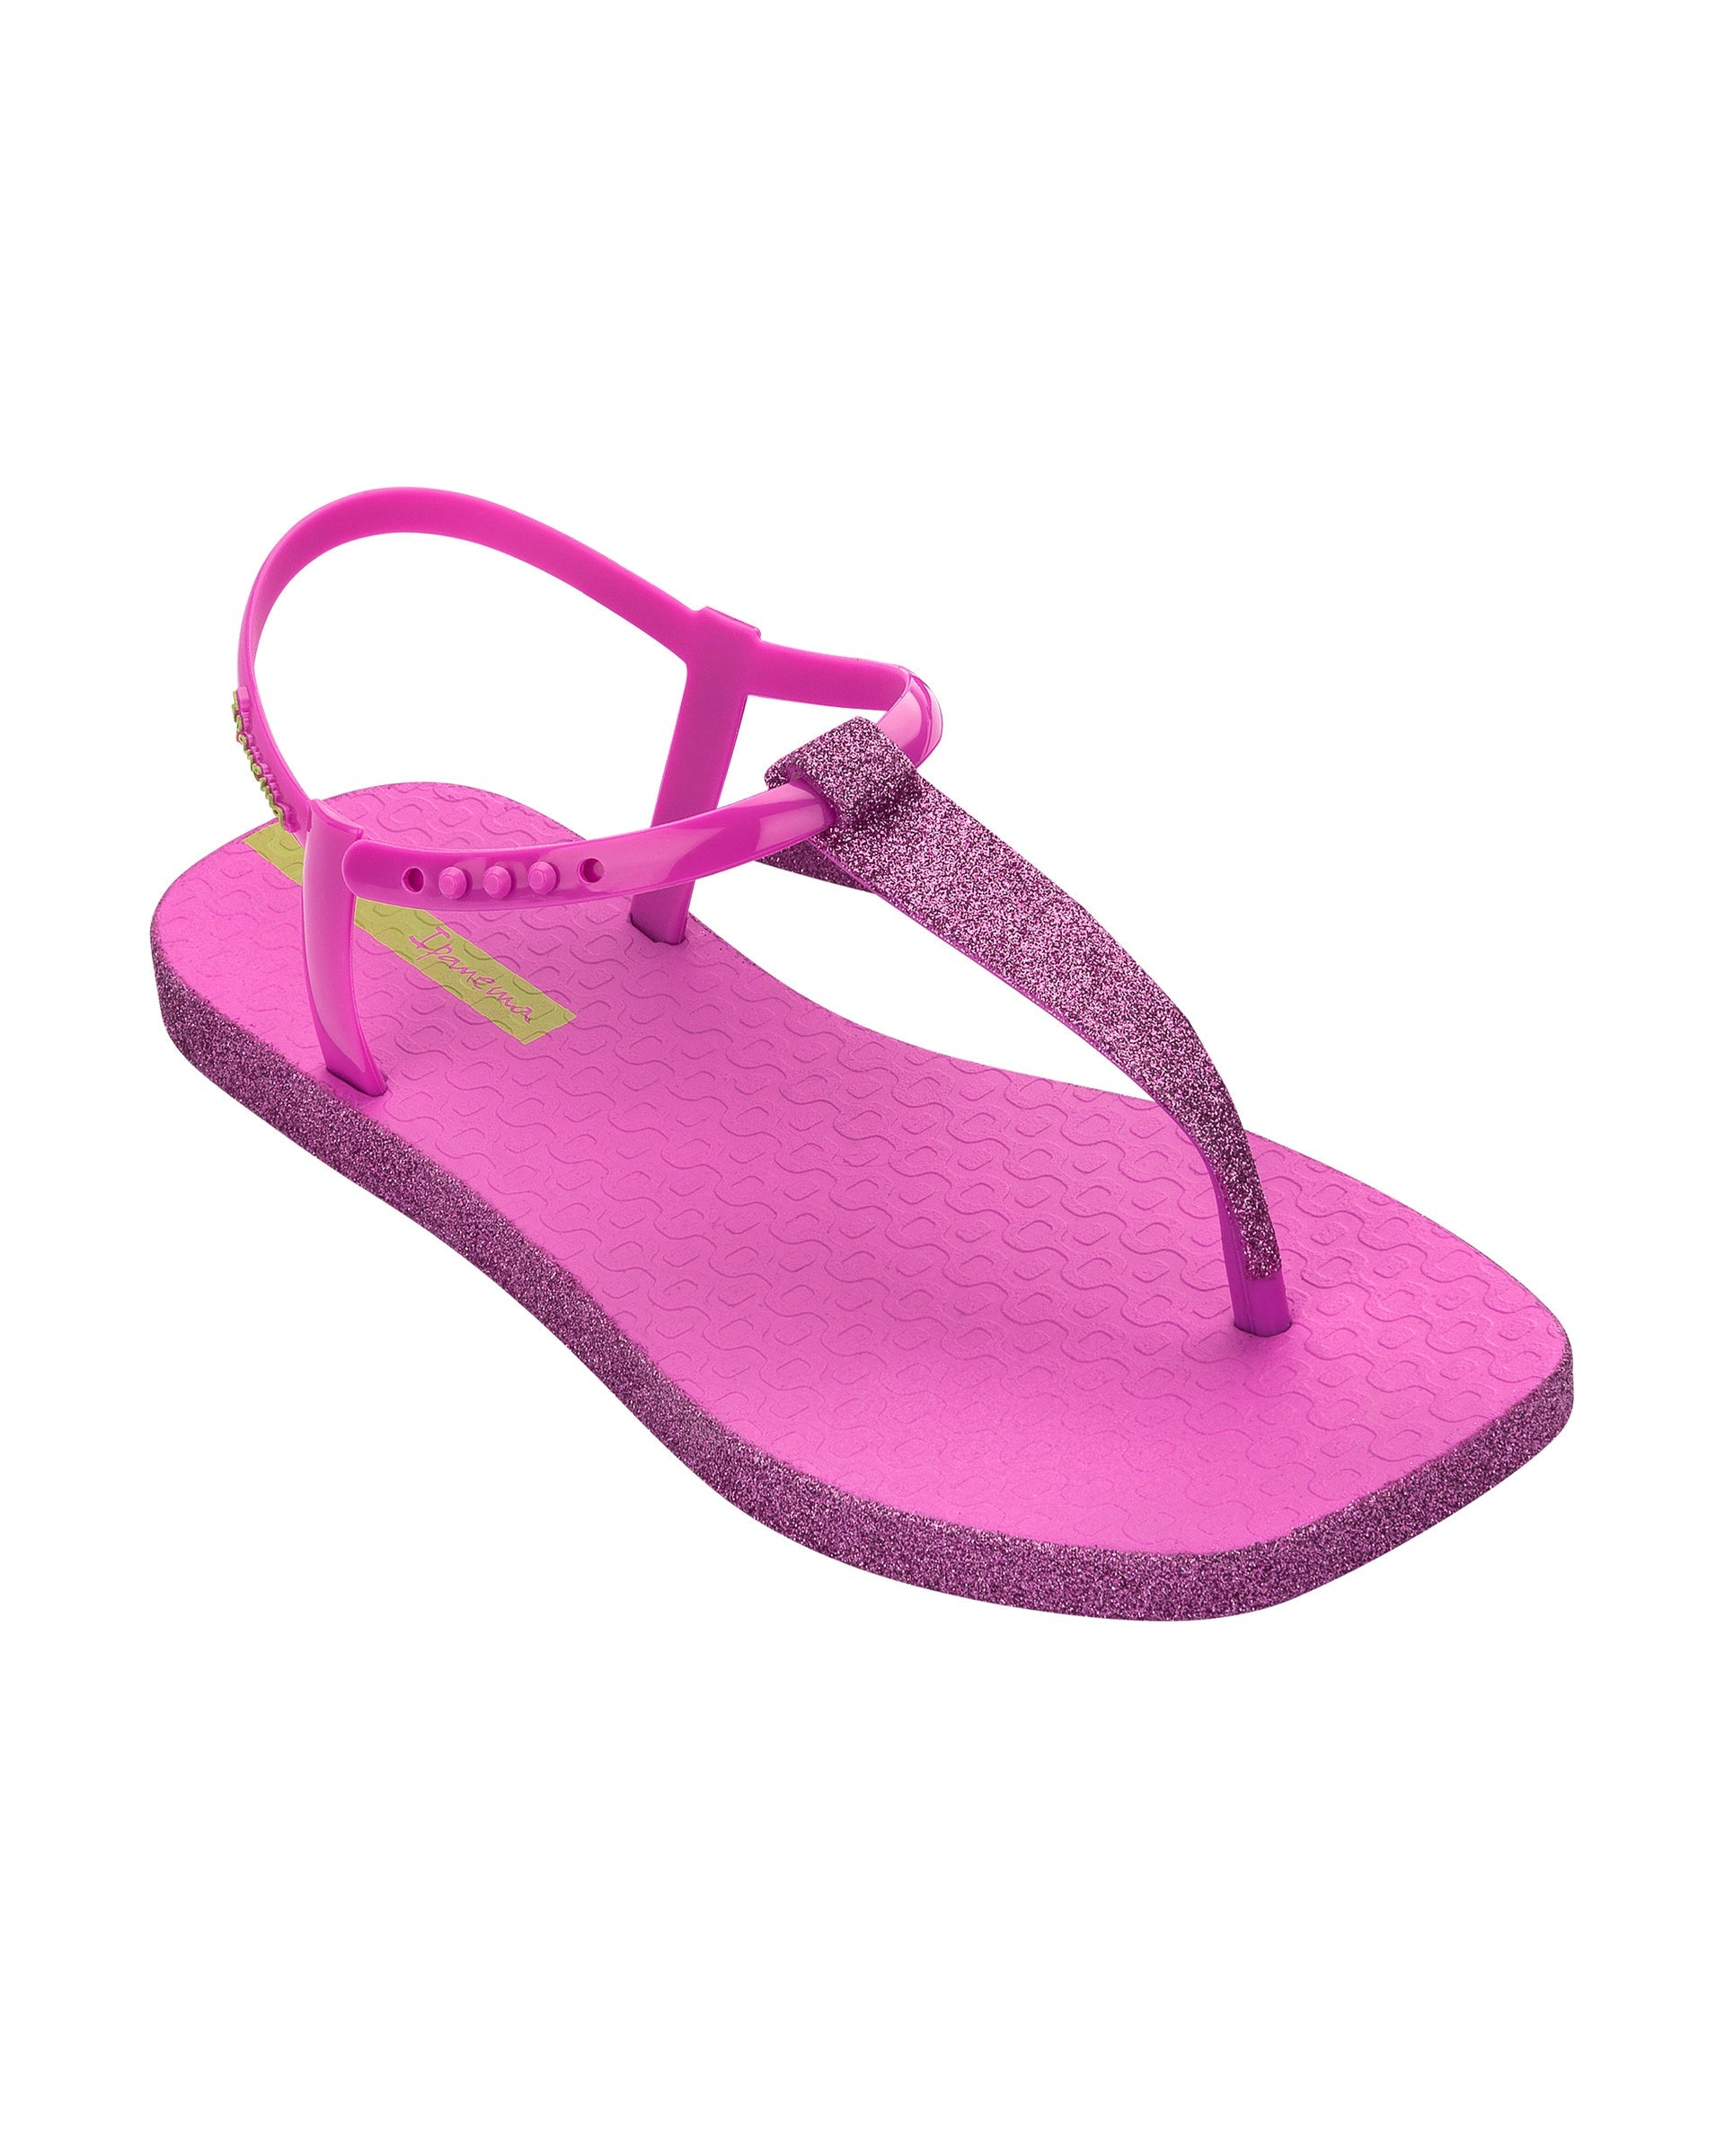 Angled view of a pink Ipanema Class Edge Glow t-strap women's sandal with glitter pink thong.